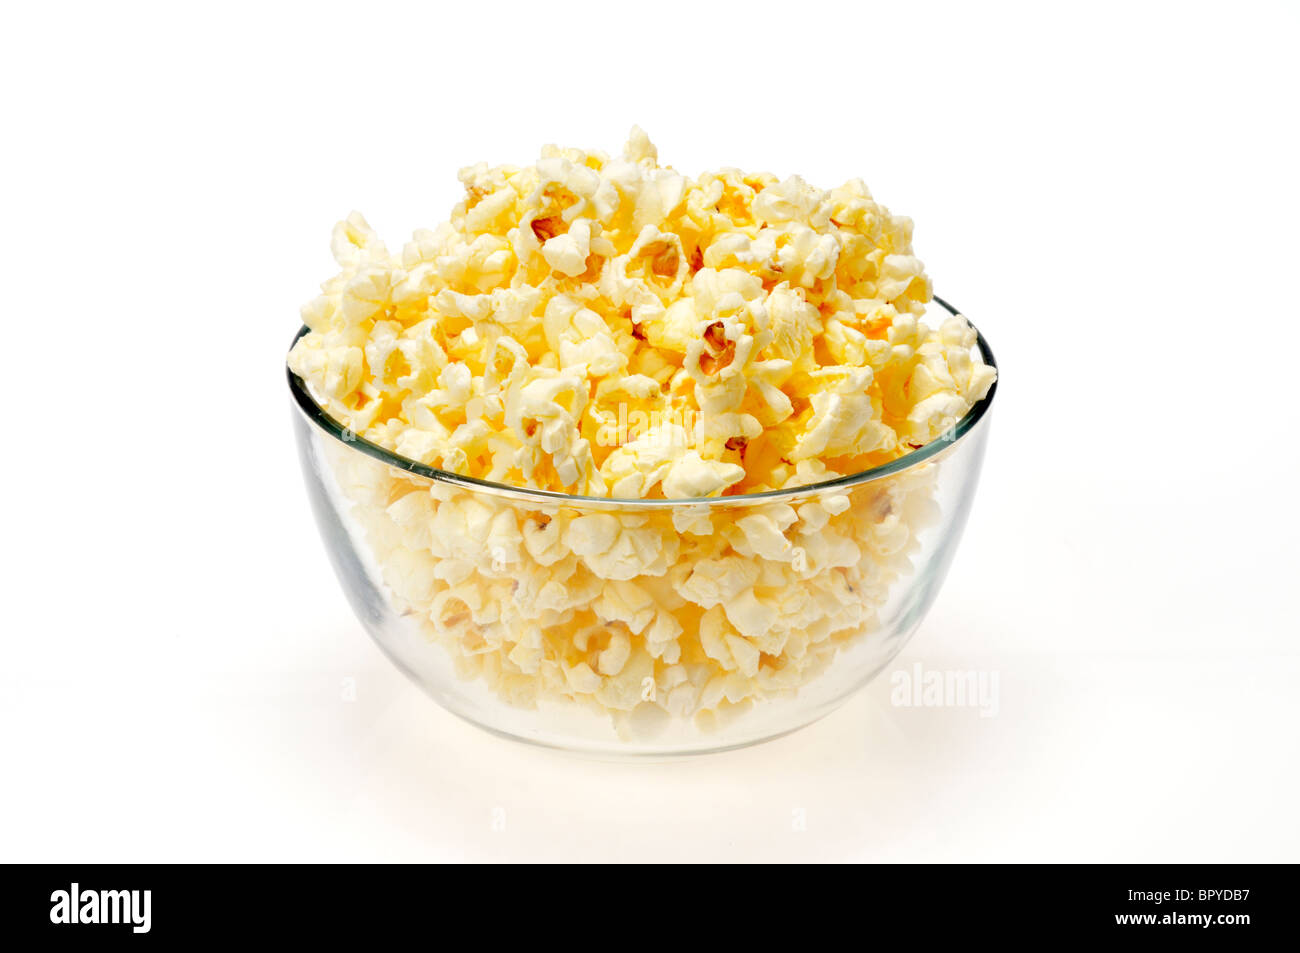 A glass bowl filled with microwave popcorn on white background, cutout. Stock Photo